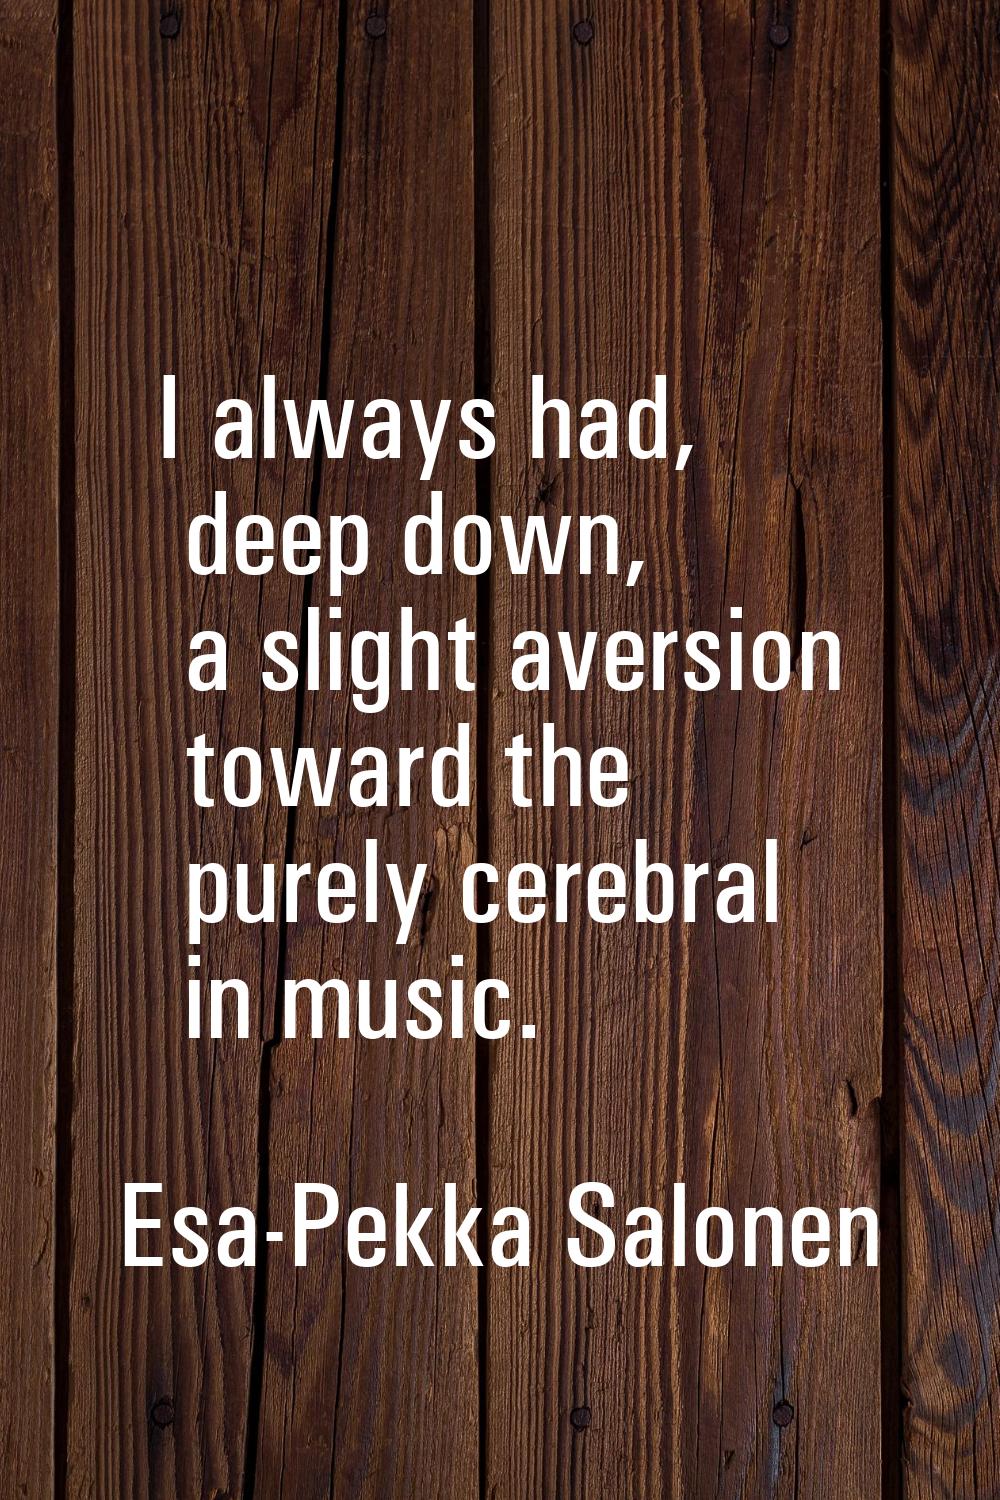 I always had, deep down, a slight aversion toward the purely cerebral in music.